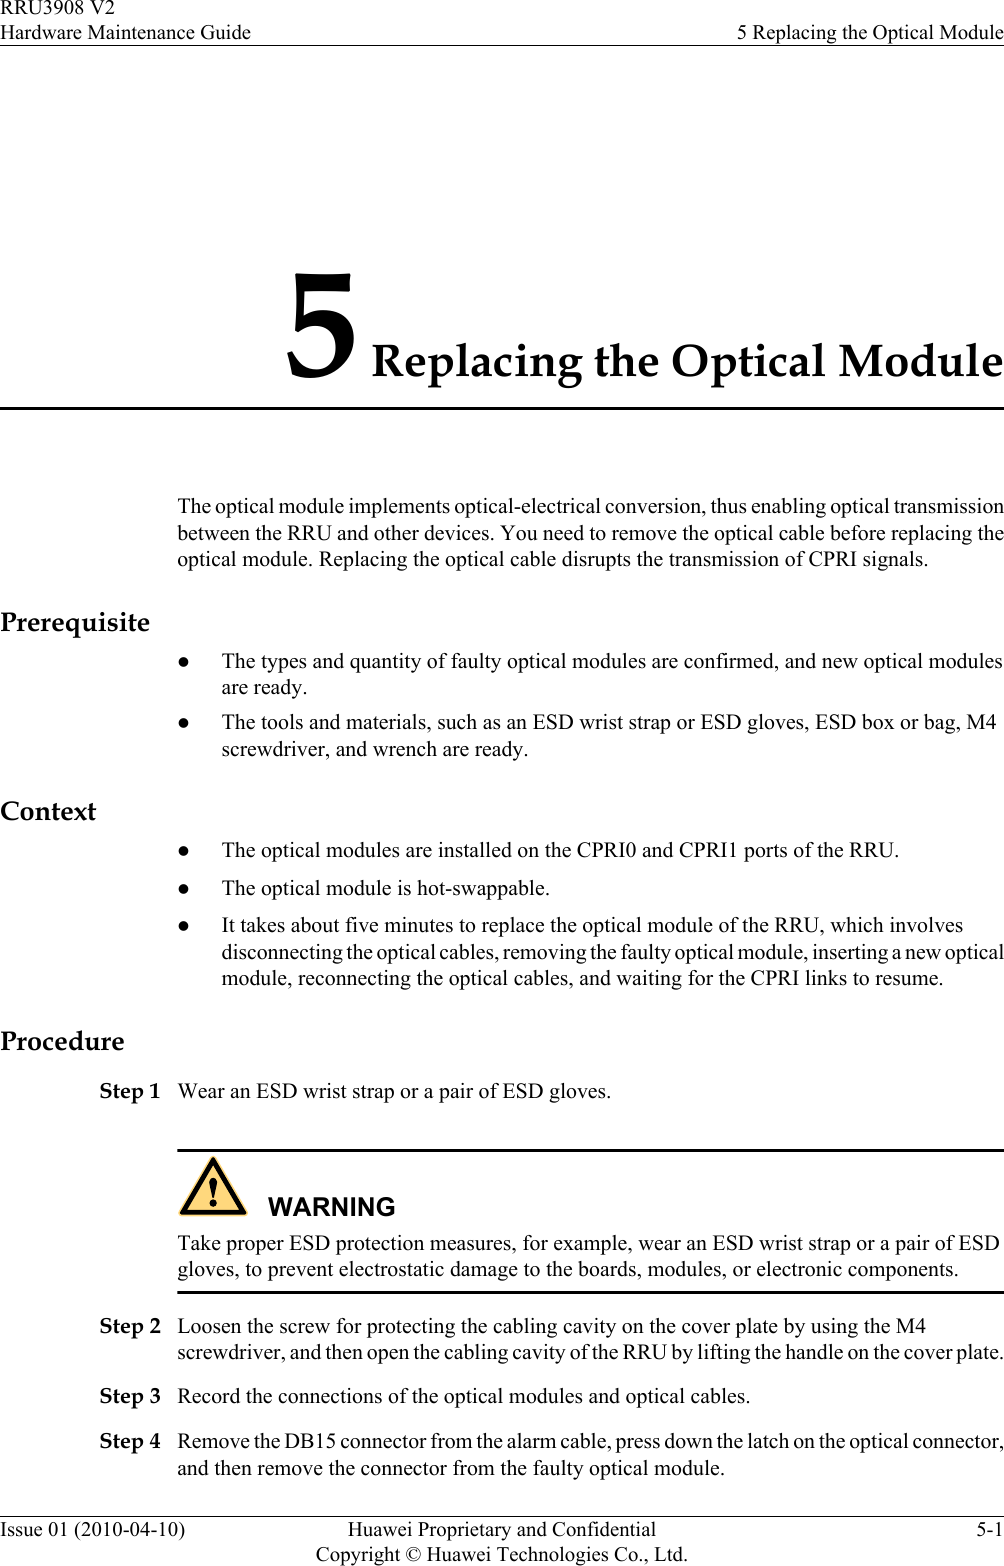 5 Replacing the Optical ModuleThe optical module implements optical-electrical conversion, thus enabling optical transmissionbetween the RRU and other devices. You need to remove the optical cable before replacing theoptical module. Replacing the optical cable disrupts the transmission of CPRI signals.PrerequisitelThe types and quantity of faulty optical modules are confirmed, and new optical modulesare ready.lThe tools and materials, such as an ESD wrist strap or ESD gloves, ESD box or bag, M4screwdriver, and wrench are ready.ContextlThe optical modules are installed on the CPRI0 and CPRI1 ports of the RRU.lThe optical module is hot-swappable.lIt takes about five minutes to replace the optical module of the RRU, which involvesdisconnecting the optical cables, removing the faulty optical module, inserting a new opticalmodule, reconnecting the optical cables, and waiting for the CPRI links to resume.ProcedureStep 1 Wear an ESD wrist strap or a pair of ESD gloves.WARNINGTake proper ESD protection measures, for example, wear an ESD wrist strap or a pair of ESDgloves, to prevent electrostatic damage to the boards, modules, or electronic components.Step 2 Loosen the screw for protecting the cabling cavity on the cover plate by using the M4screwdriver, and then open the cabling cavity of the RRU by lifting the handle on the cover plate.Step 3 Record the connections of the optical modules and optical cables.Step 4 Remove the DB15 connector from the alarm cable, press down the latch on the optical connector,and then remove the connector from the faulty optical module.RRU3908 V2Hardware Maintenance Guide 5 Replacing the Optical ModuleIssue 01 (2010-04-10) Huawei Proprietary and ConfidentialCopyright © Huawei Technologies Co., Ltd.5-1